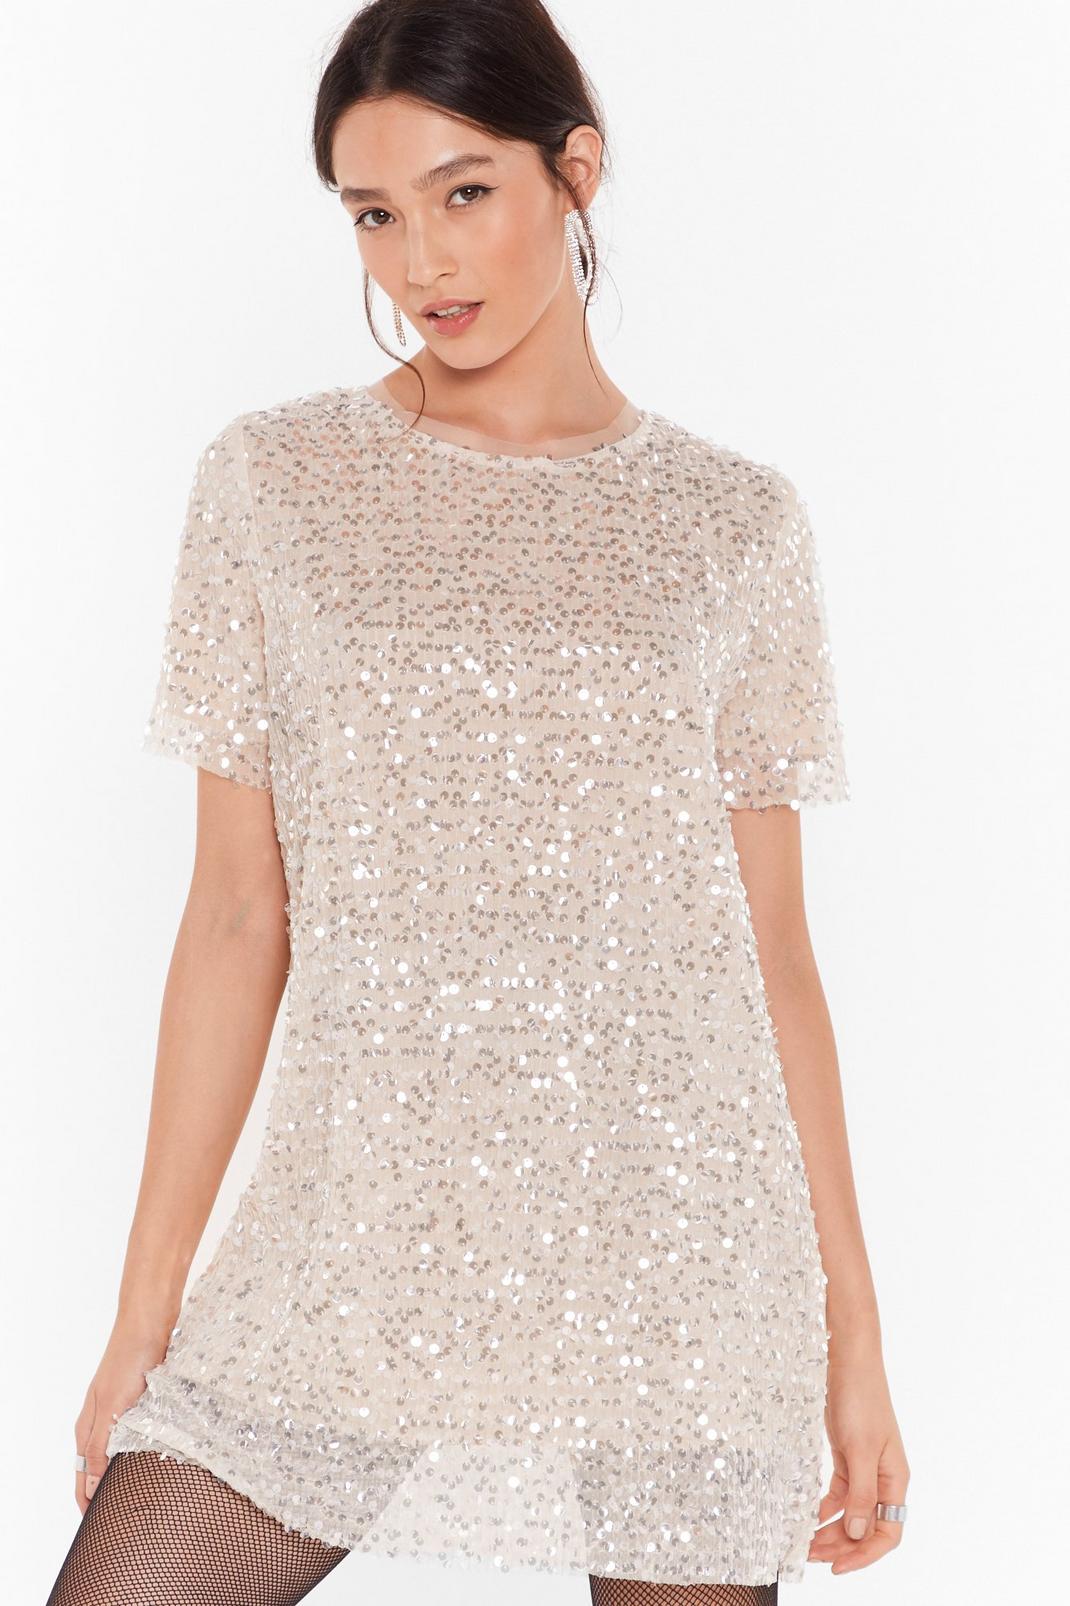 You Can't Sequin Them All Tee Dress image number 1